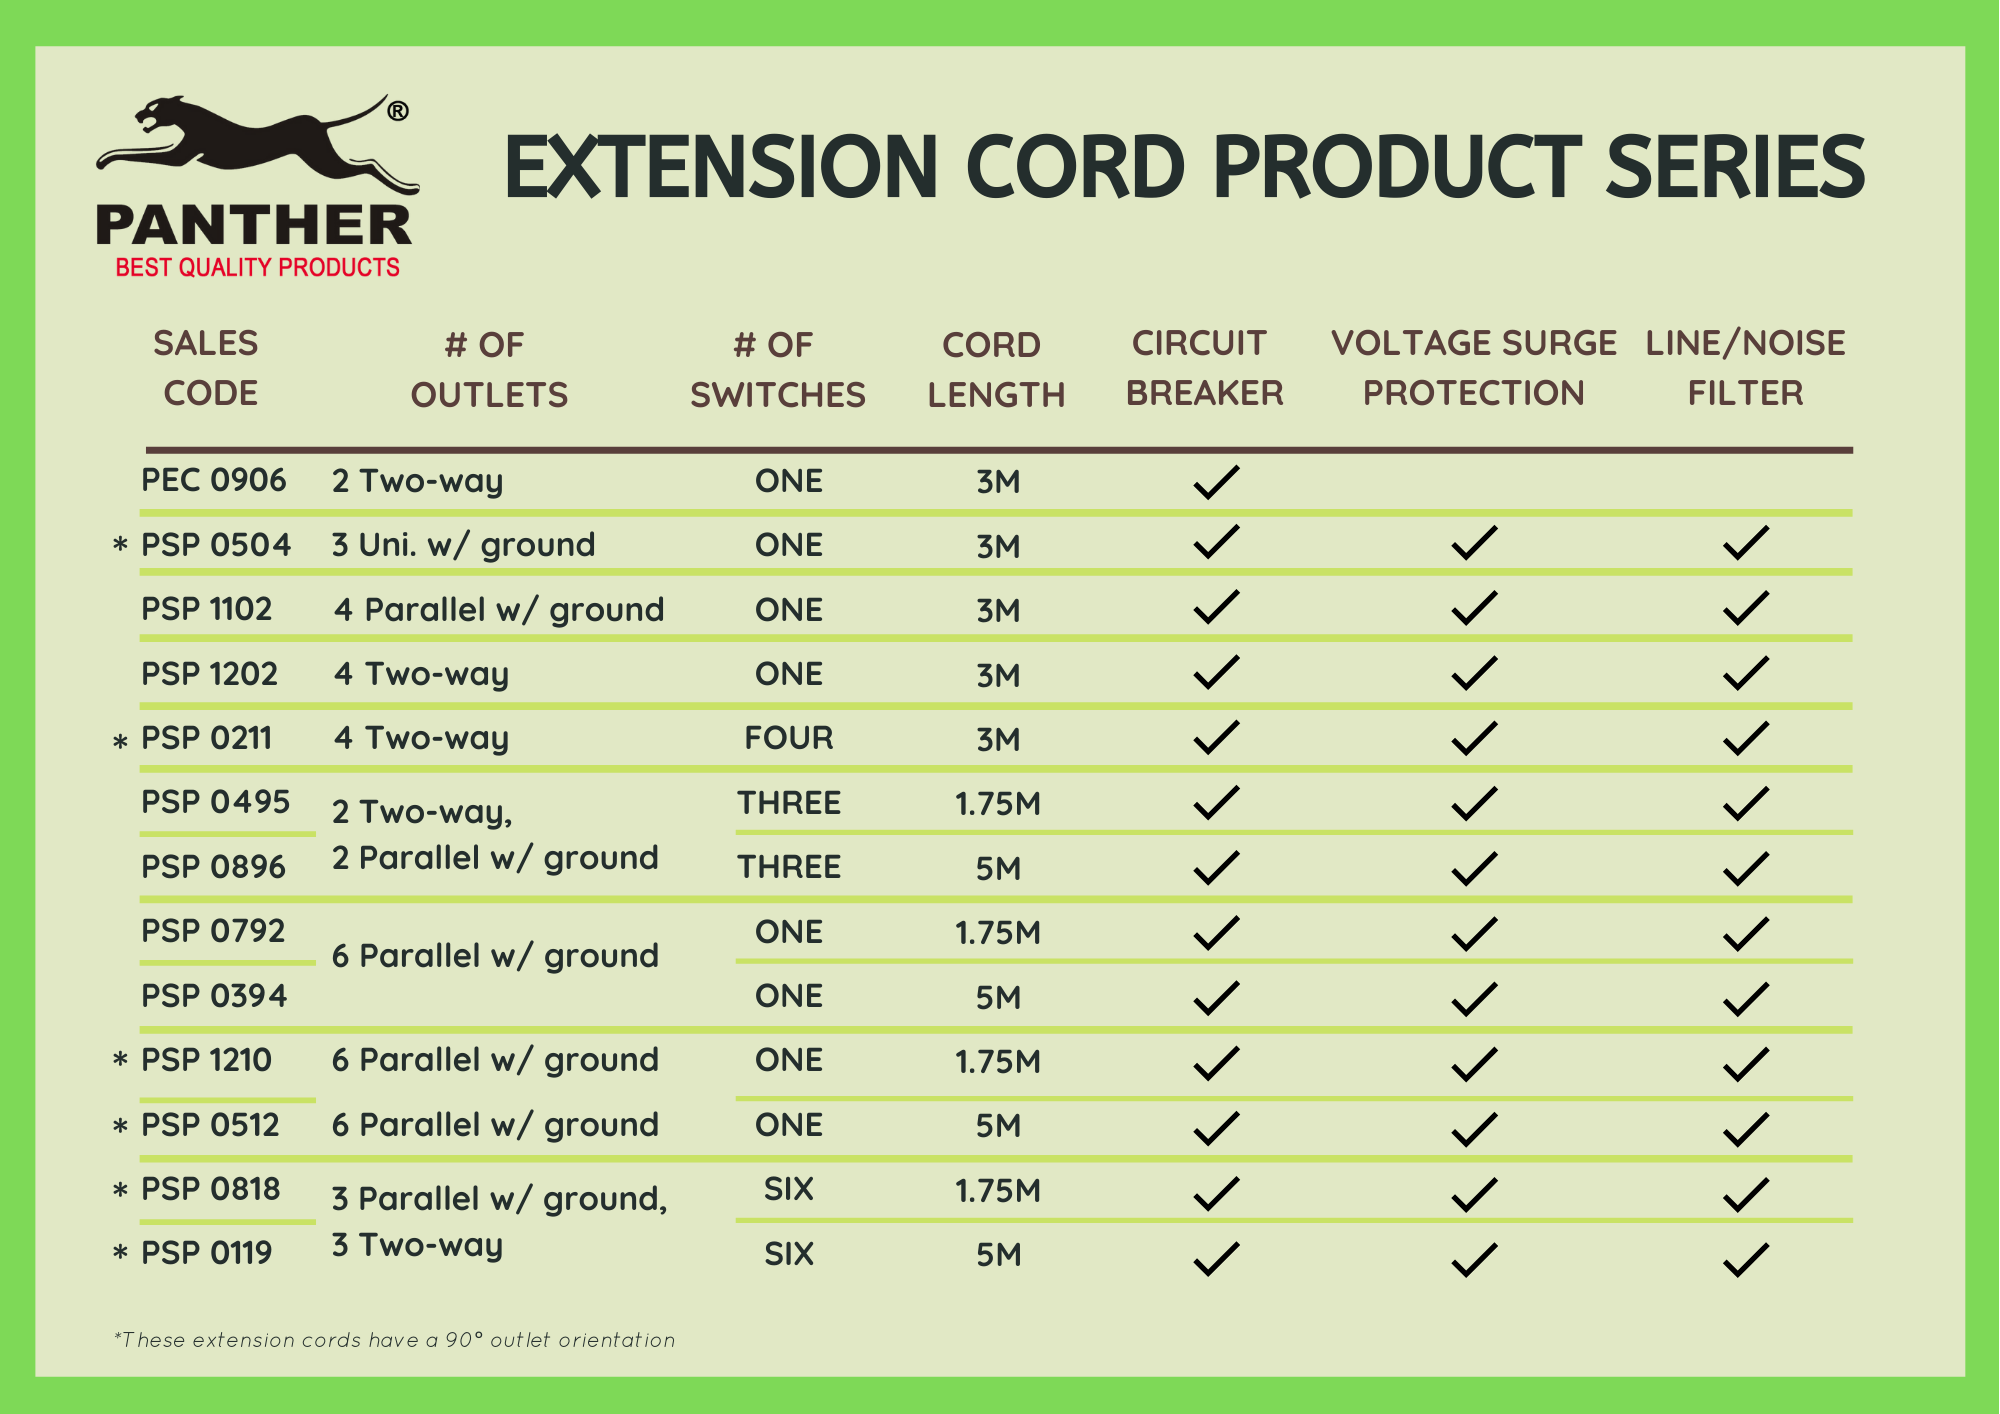 Specifications list of available Panther Best Quality Products Extension Cords that are proudly made in the Philippines